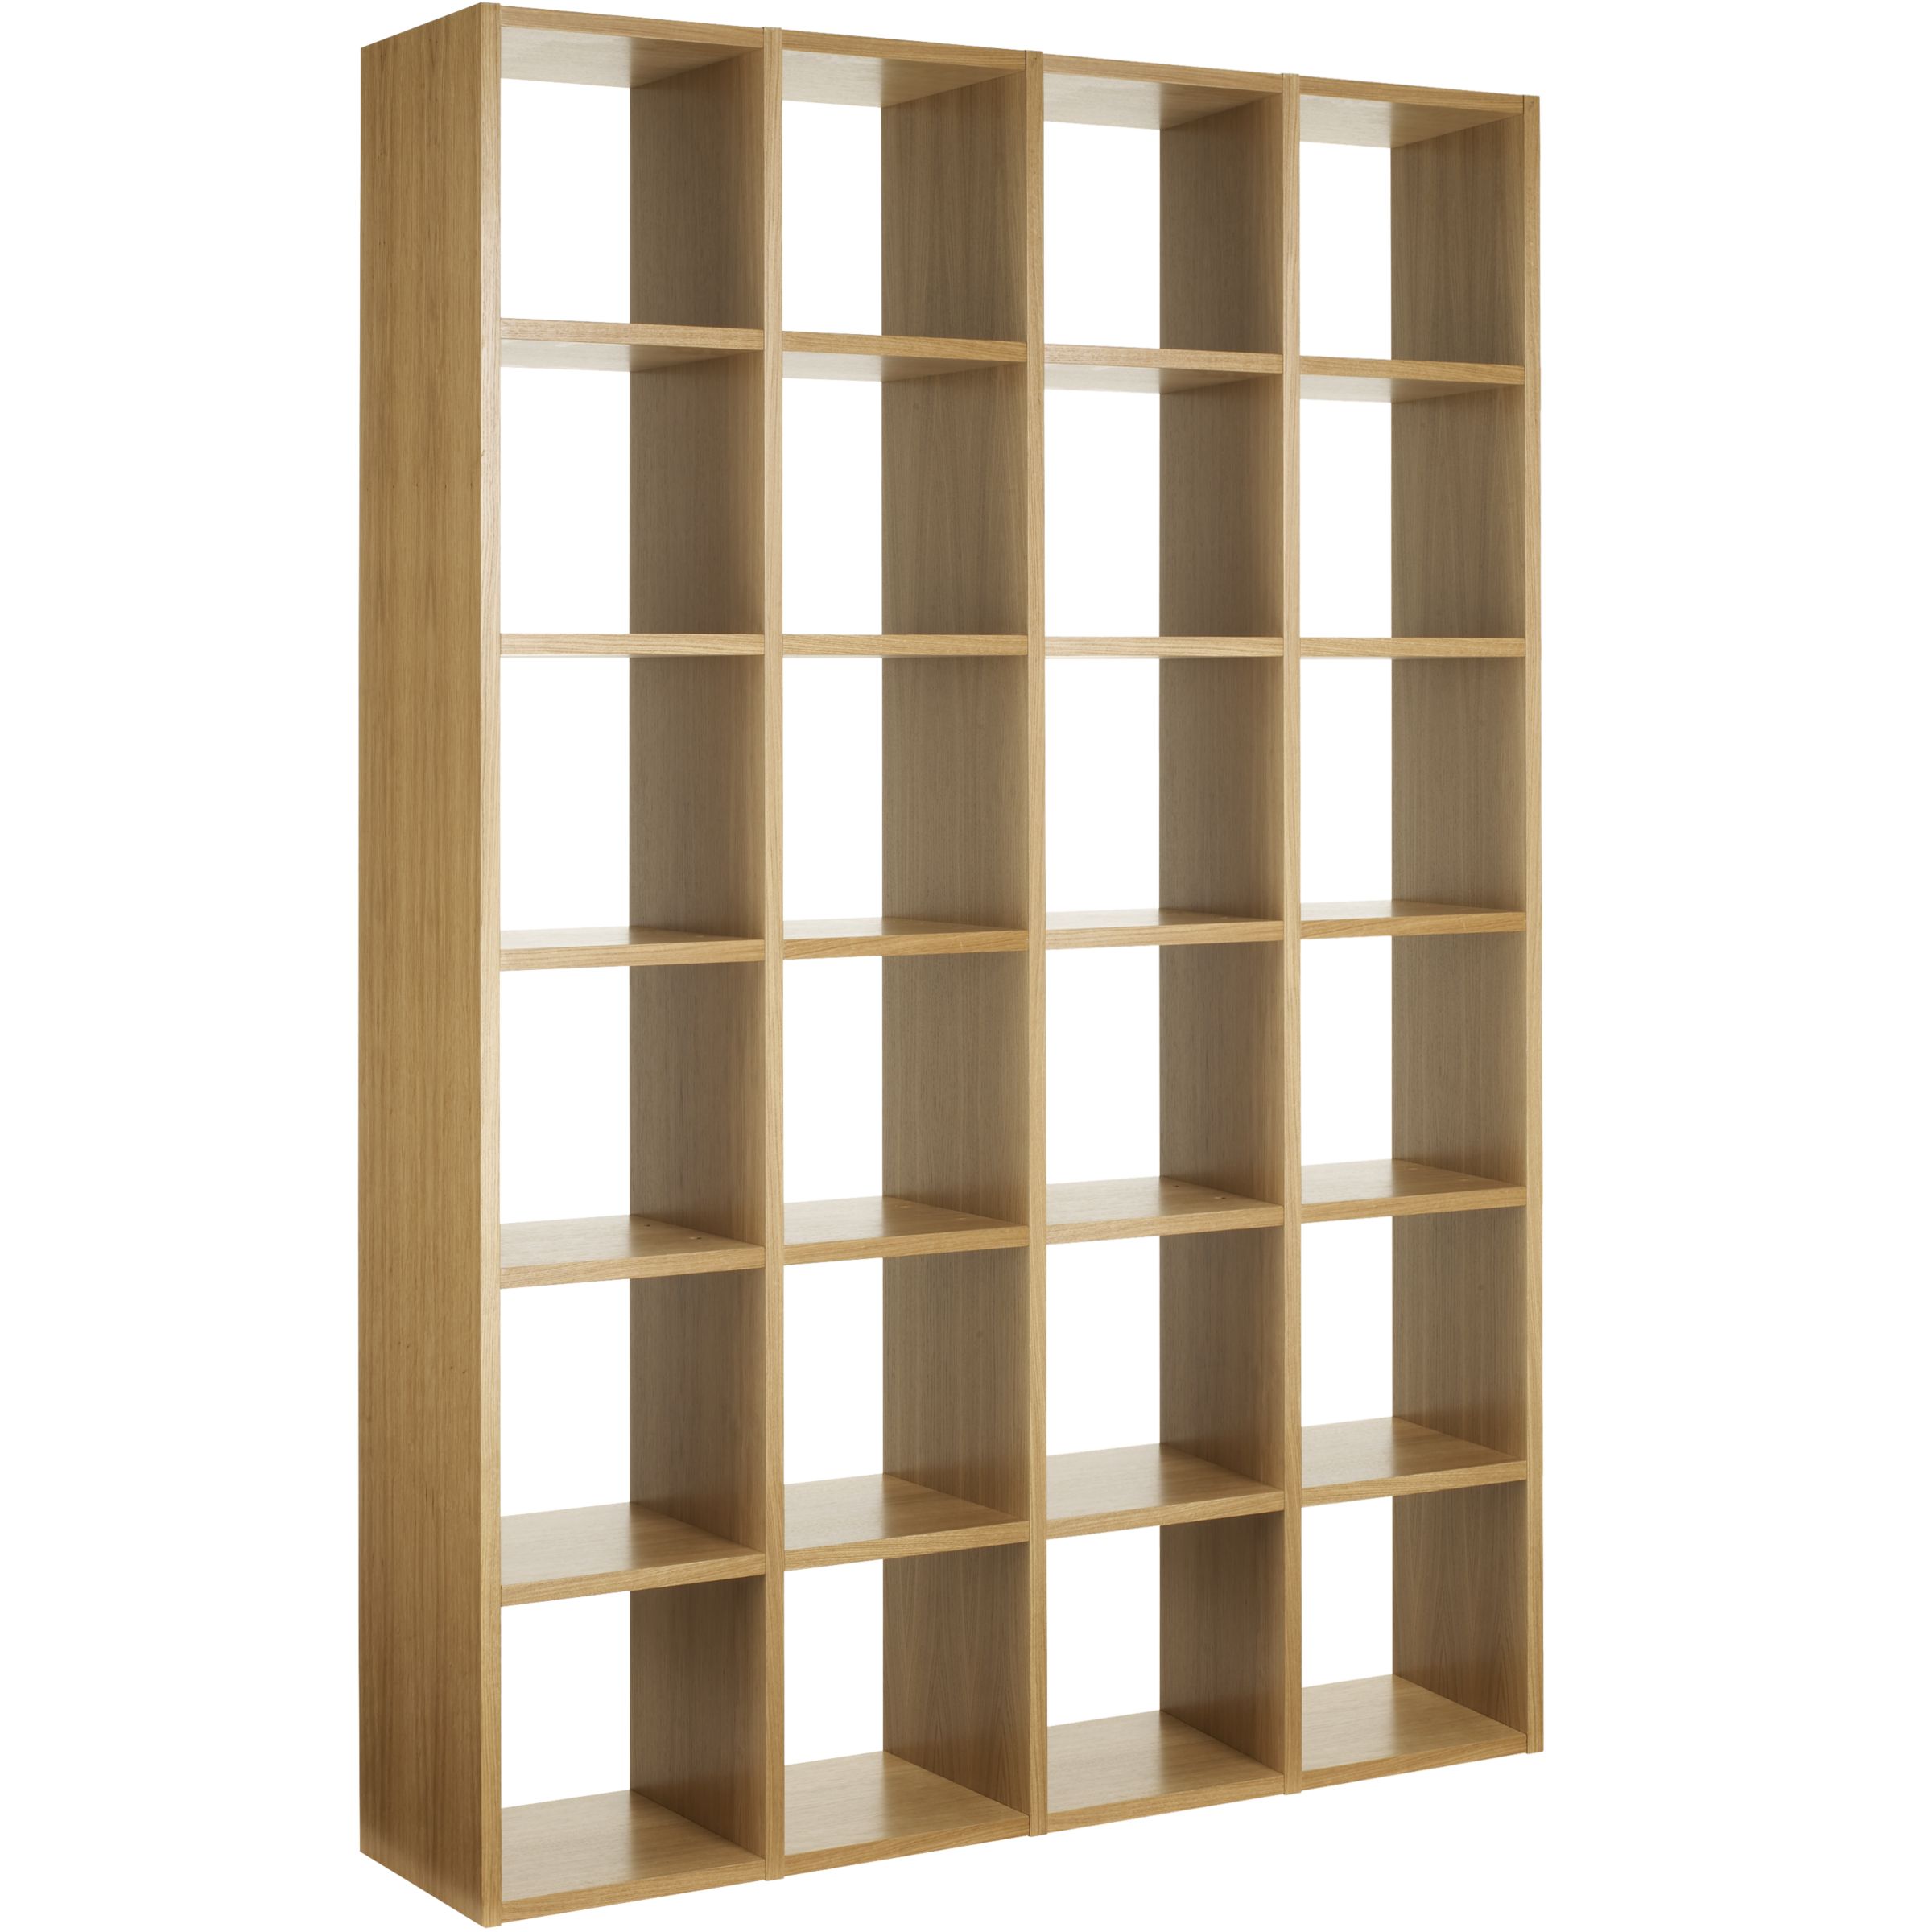 John Lewis Linear Bookcases, Kit A and 3x Kit B